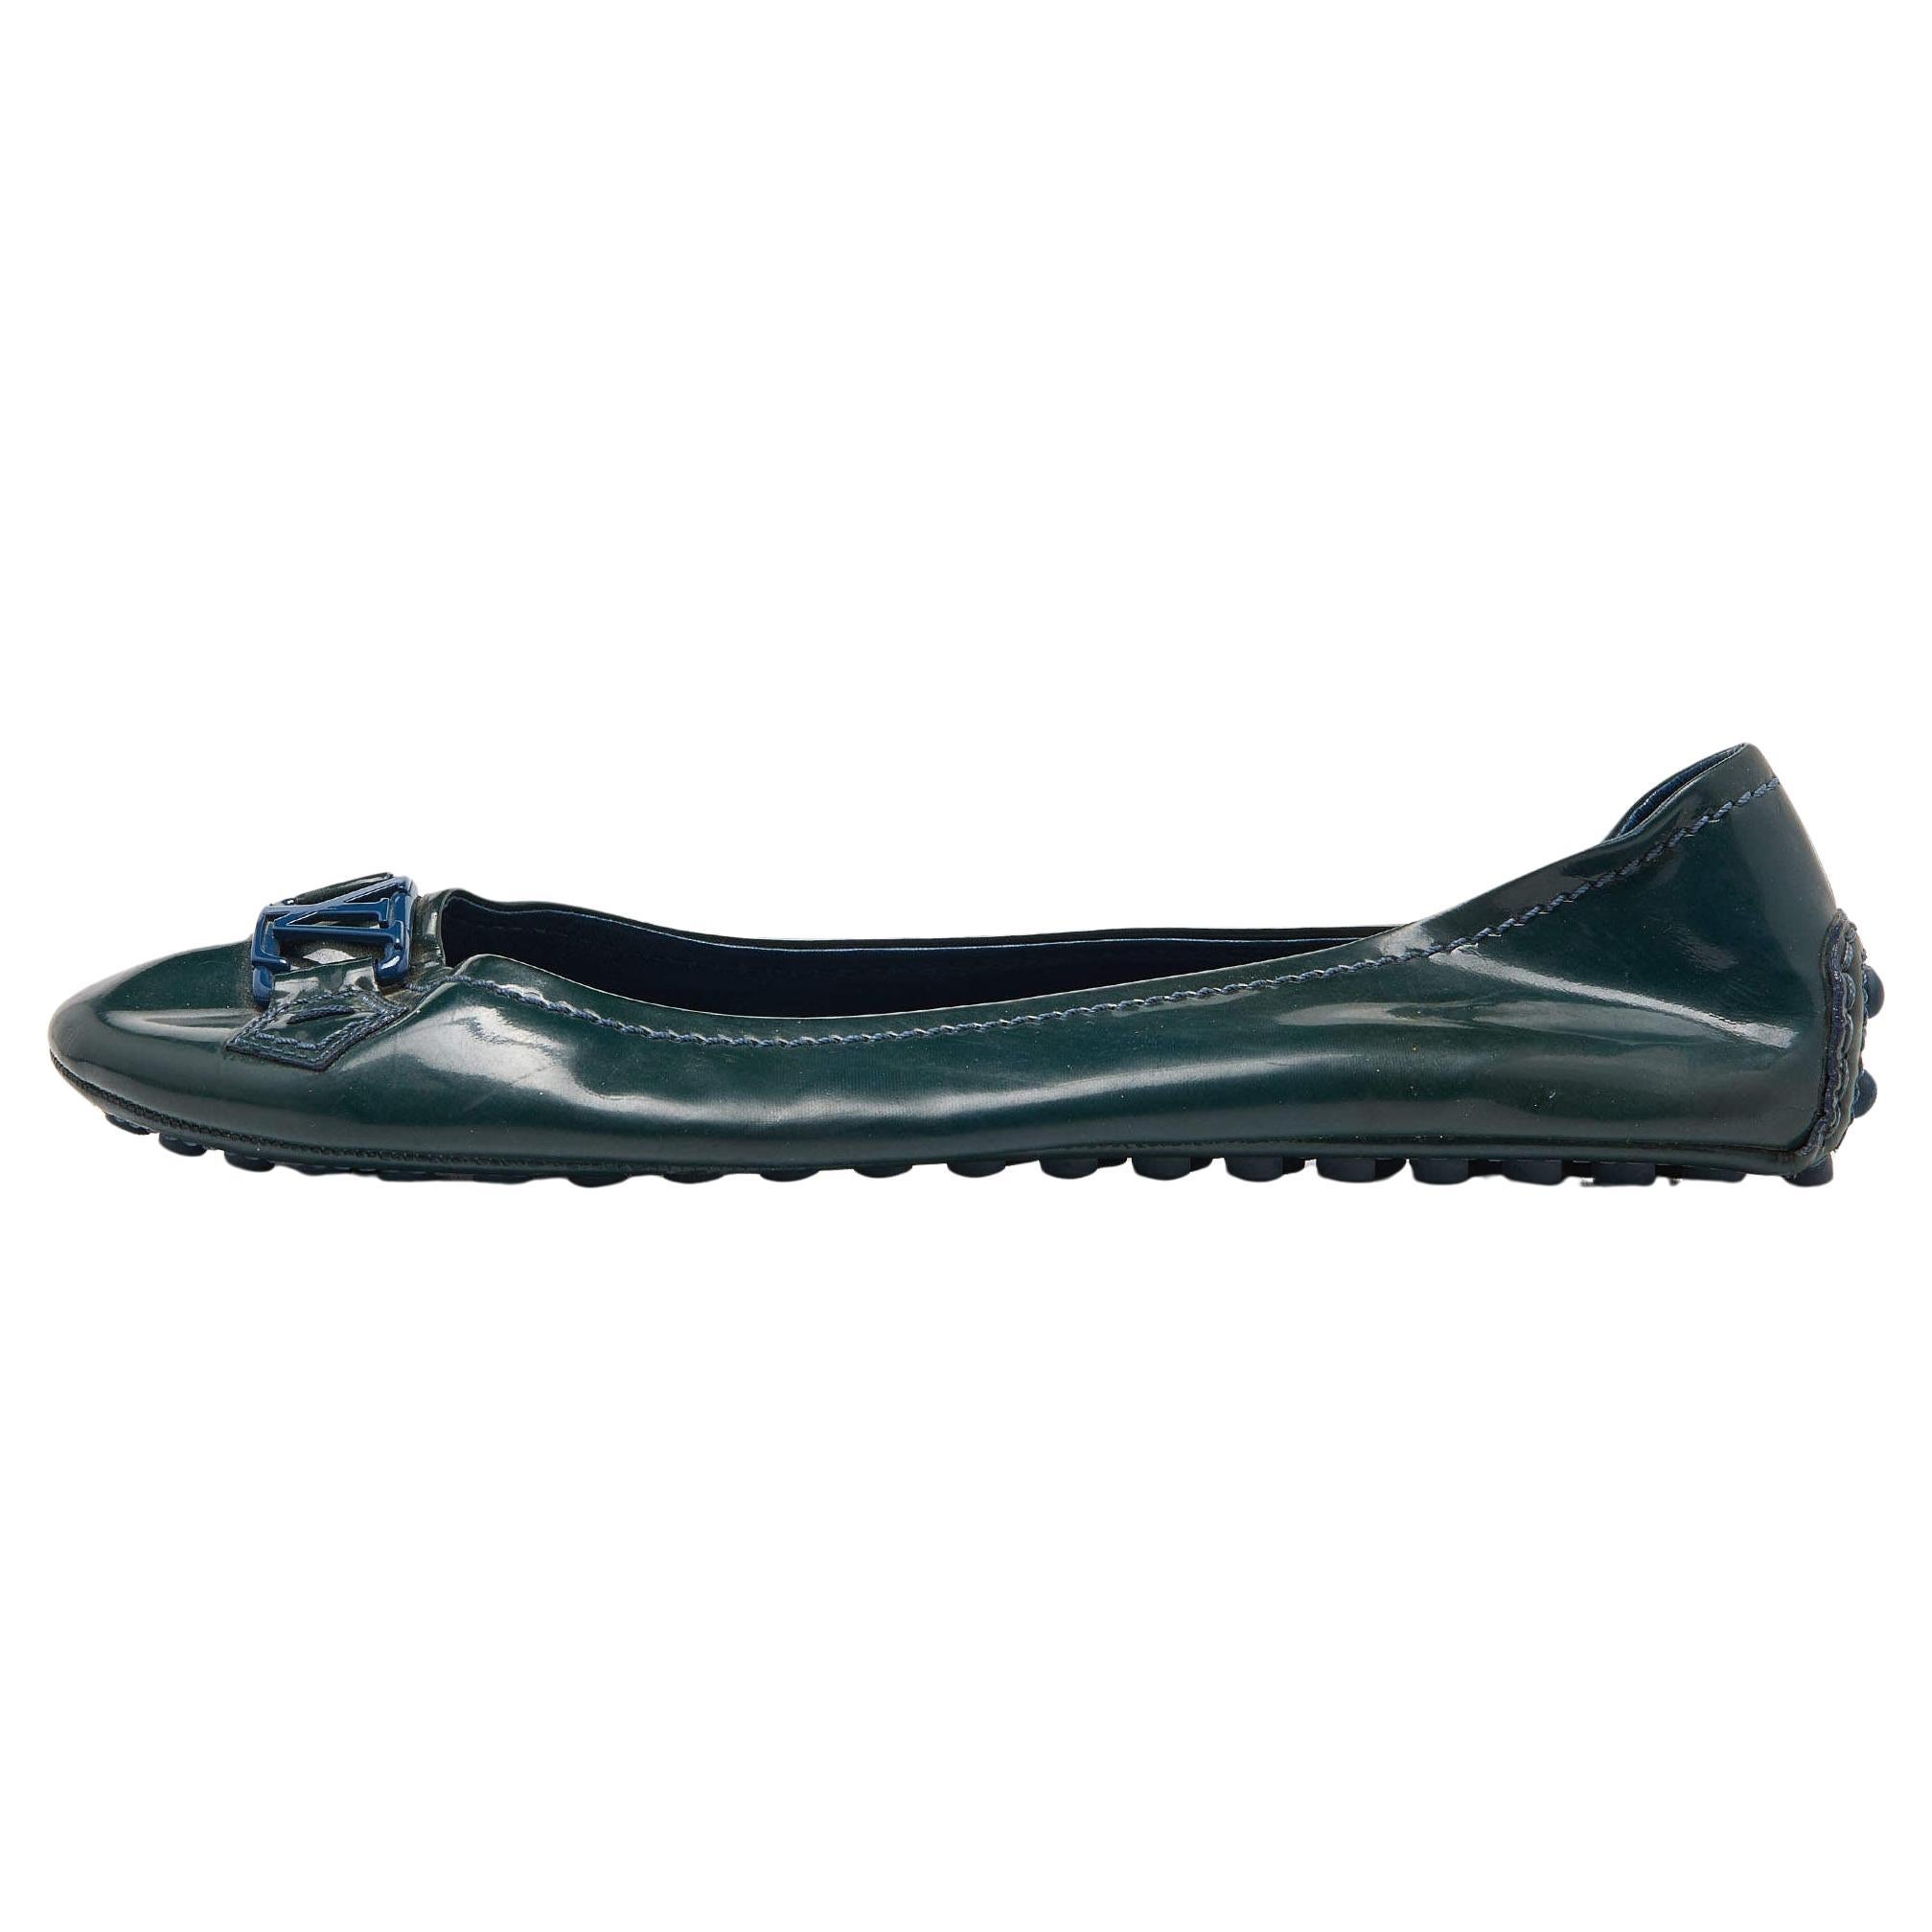 Louis Vuitton Dark Green Patent Leather Oxford Ballet Flats Size 39.5 For Sale